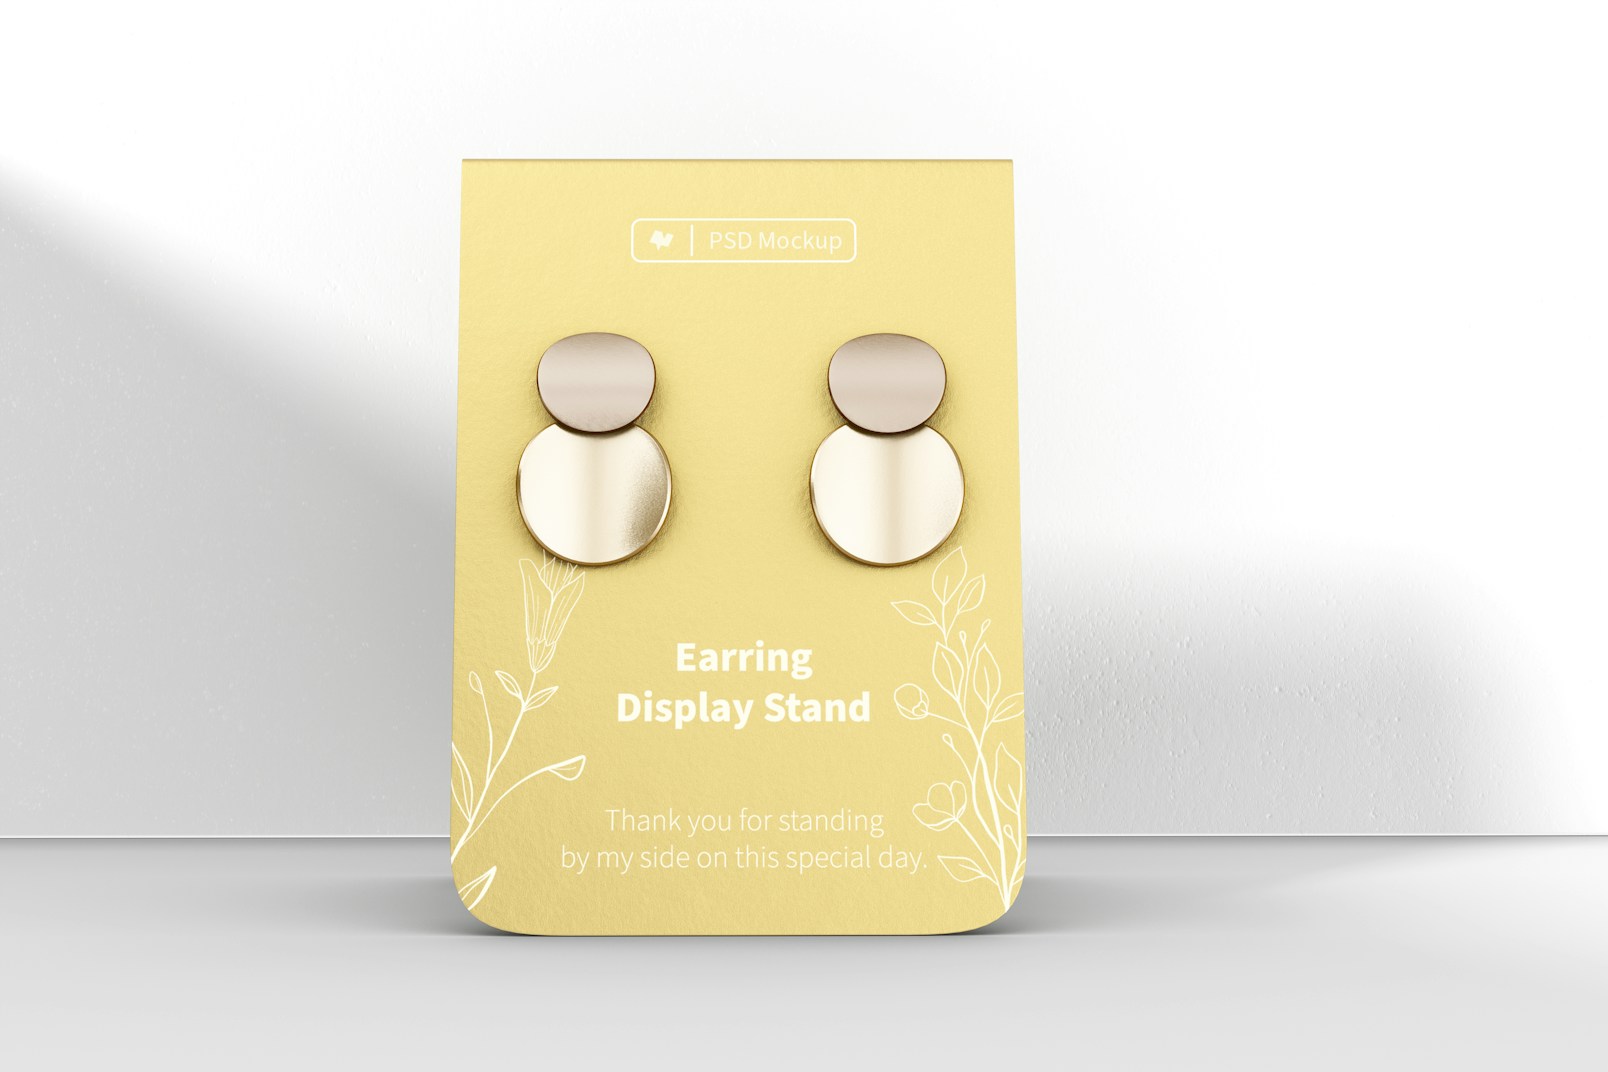 Earring Display Stand Mockup, Front View